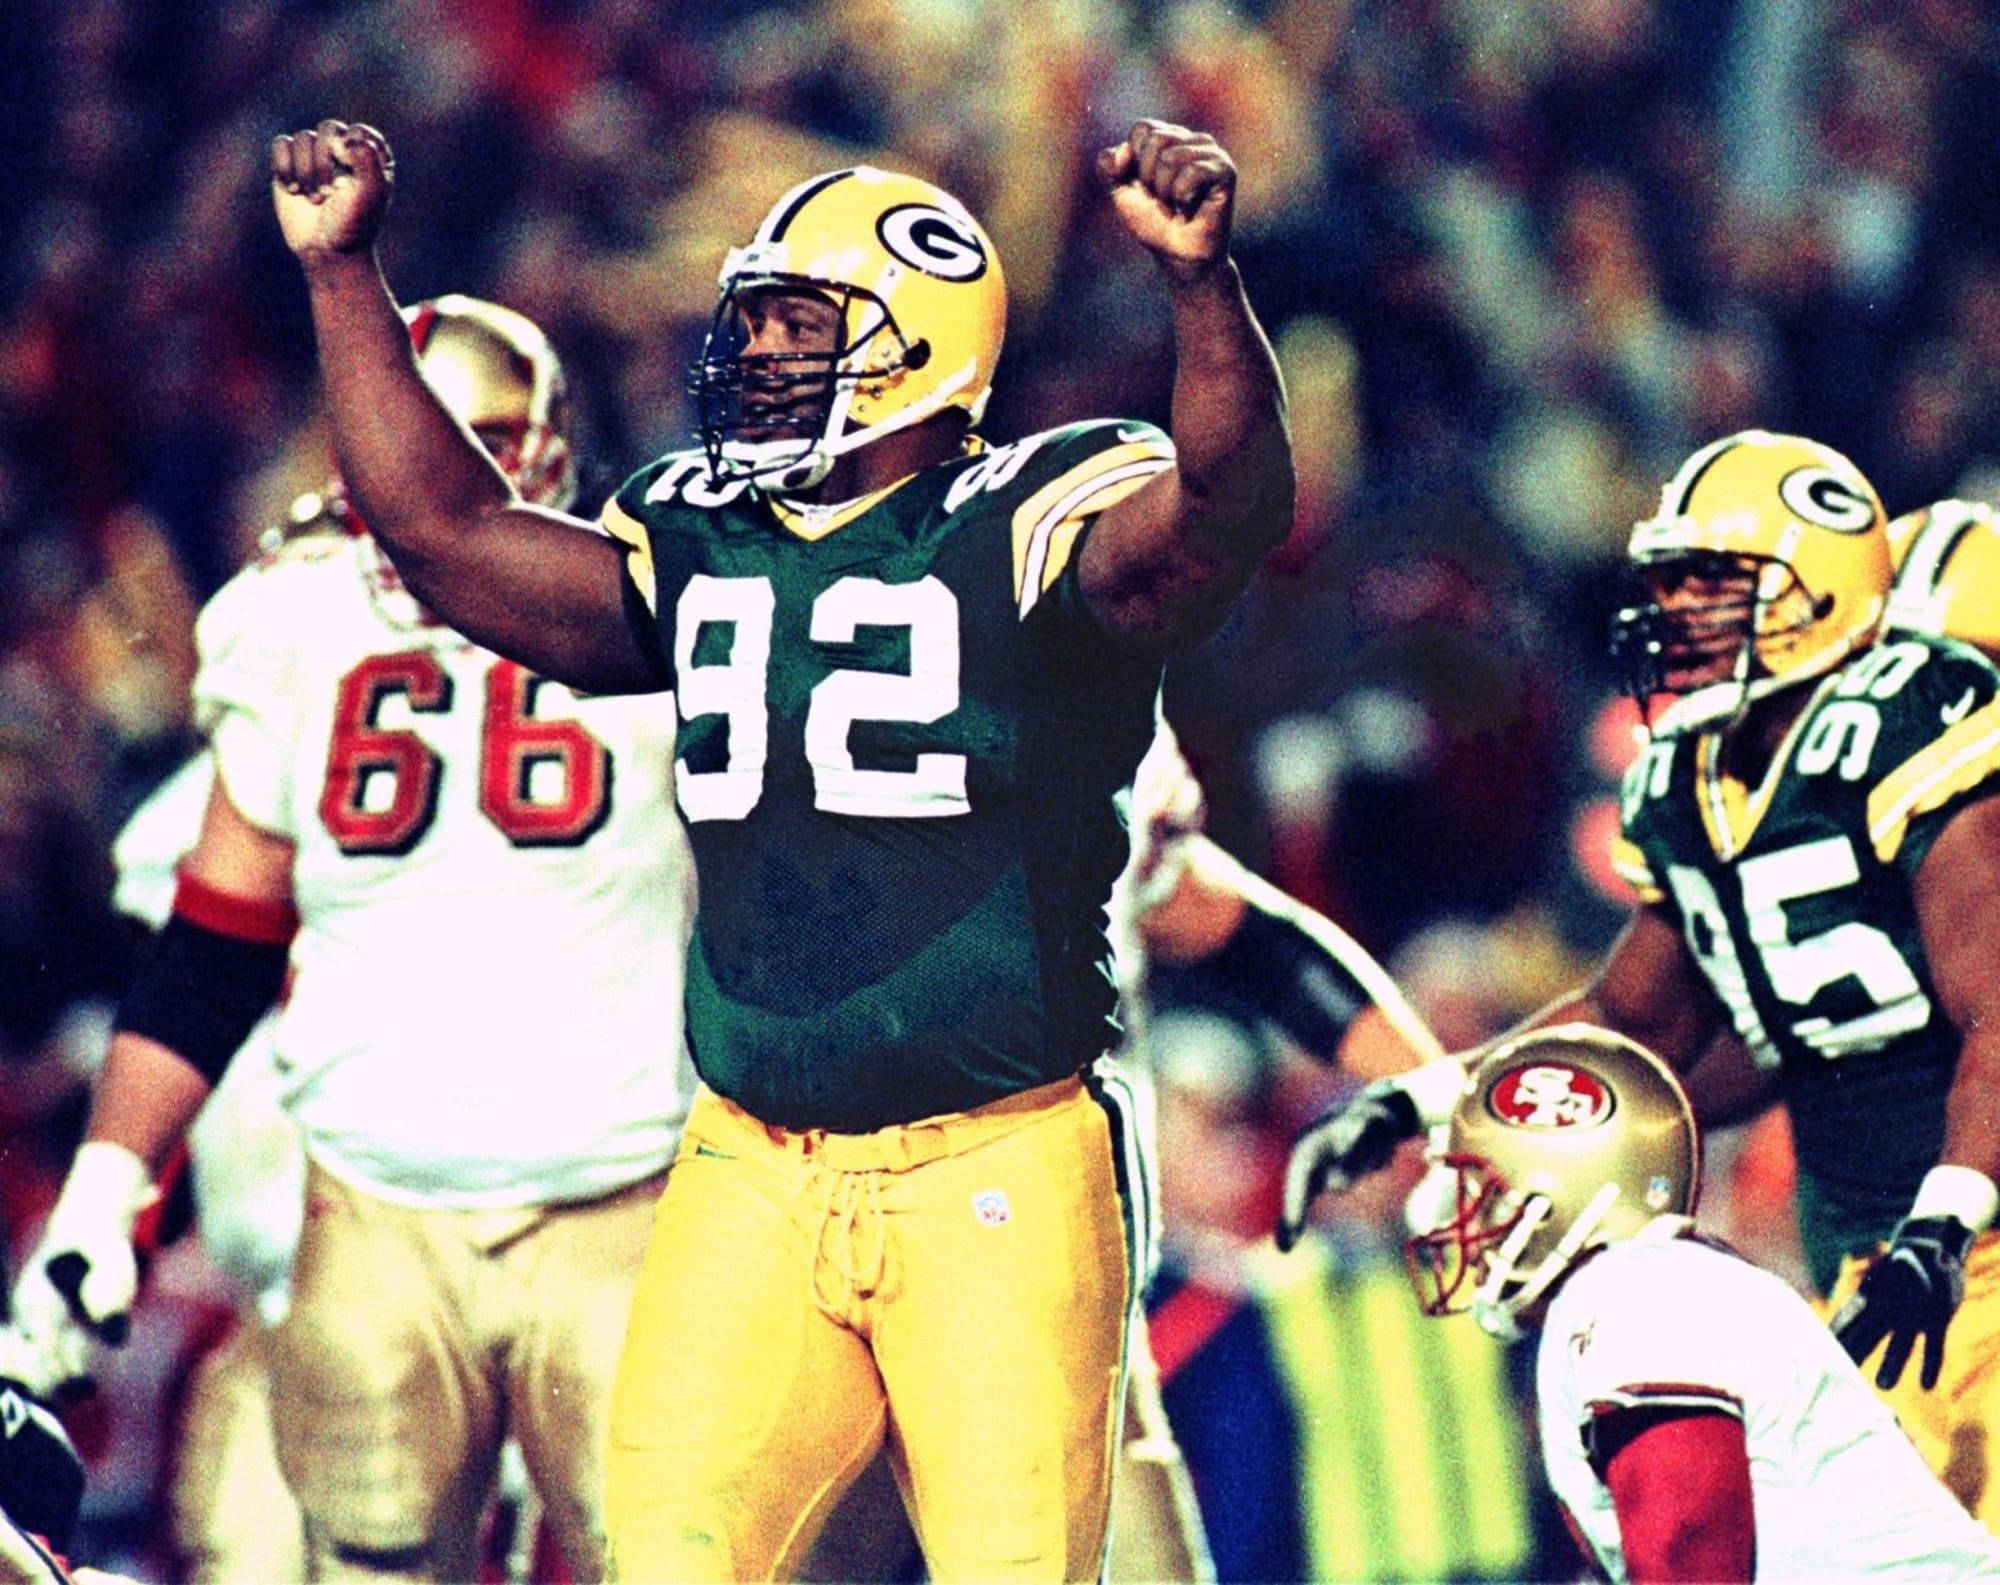 Packers: Three things that made Reggie White so great